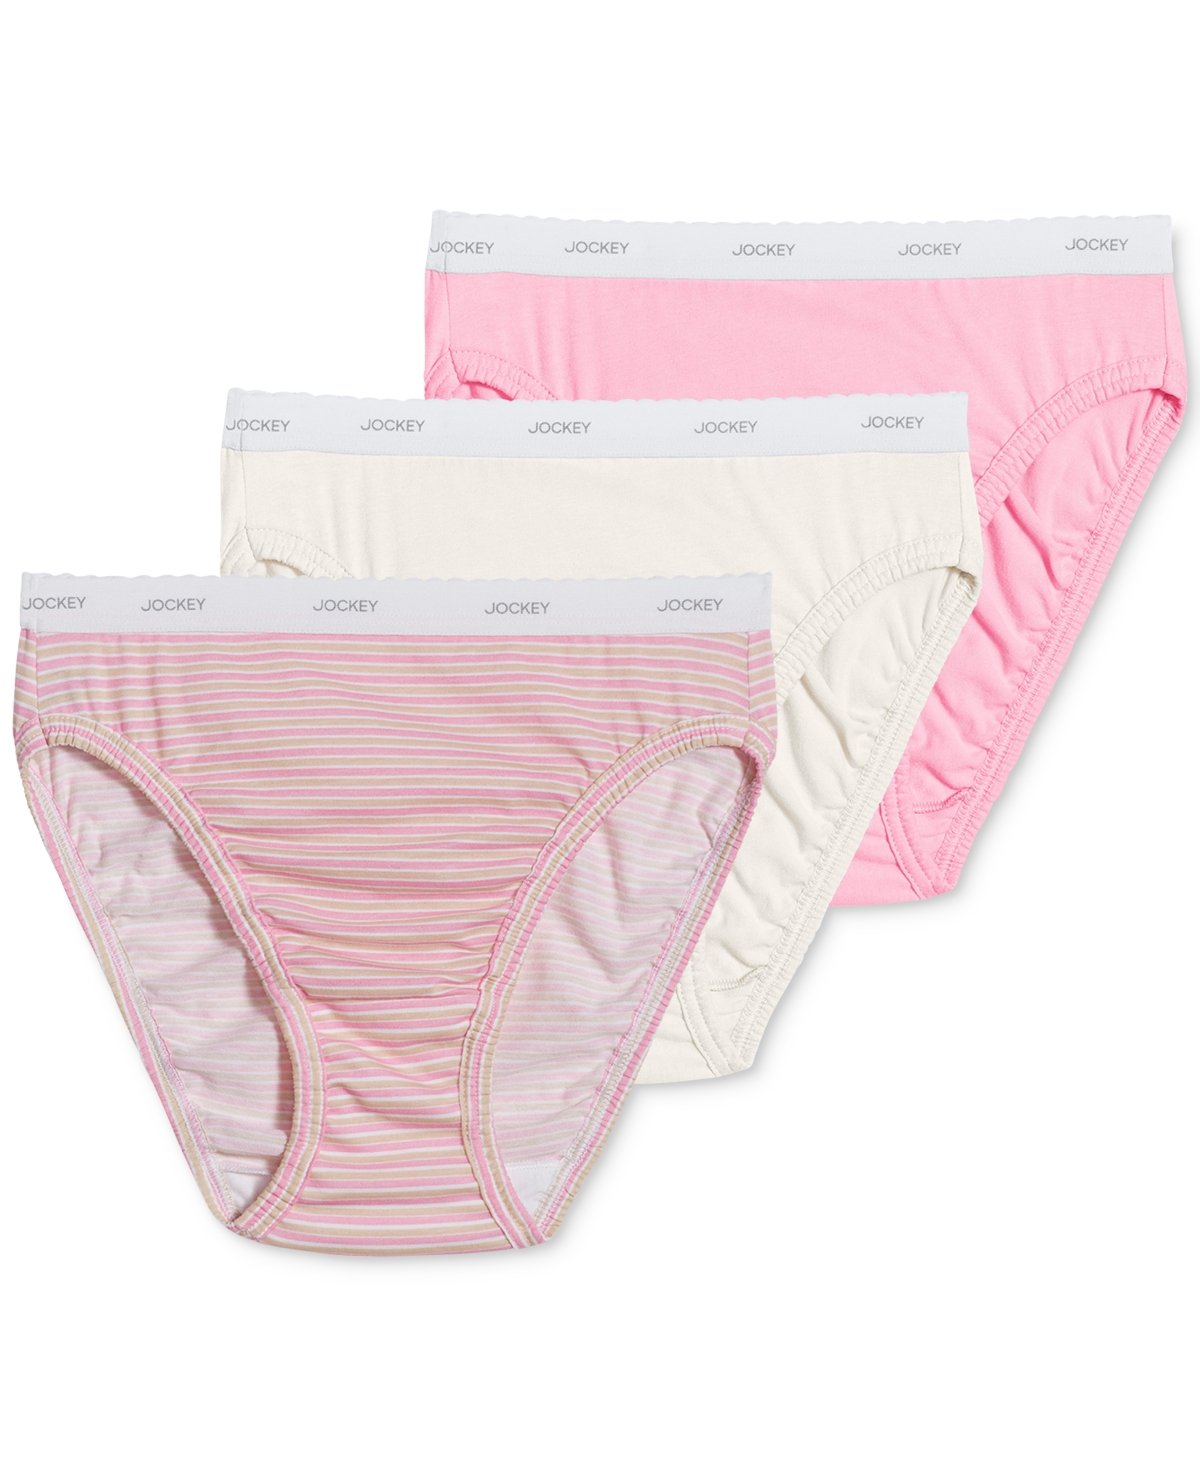 Classics French Cut Underwear 3 Pack 9480, 9481, Extended Sizes - White